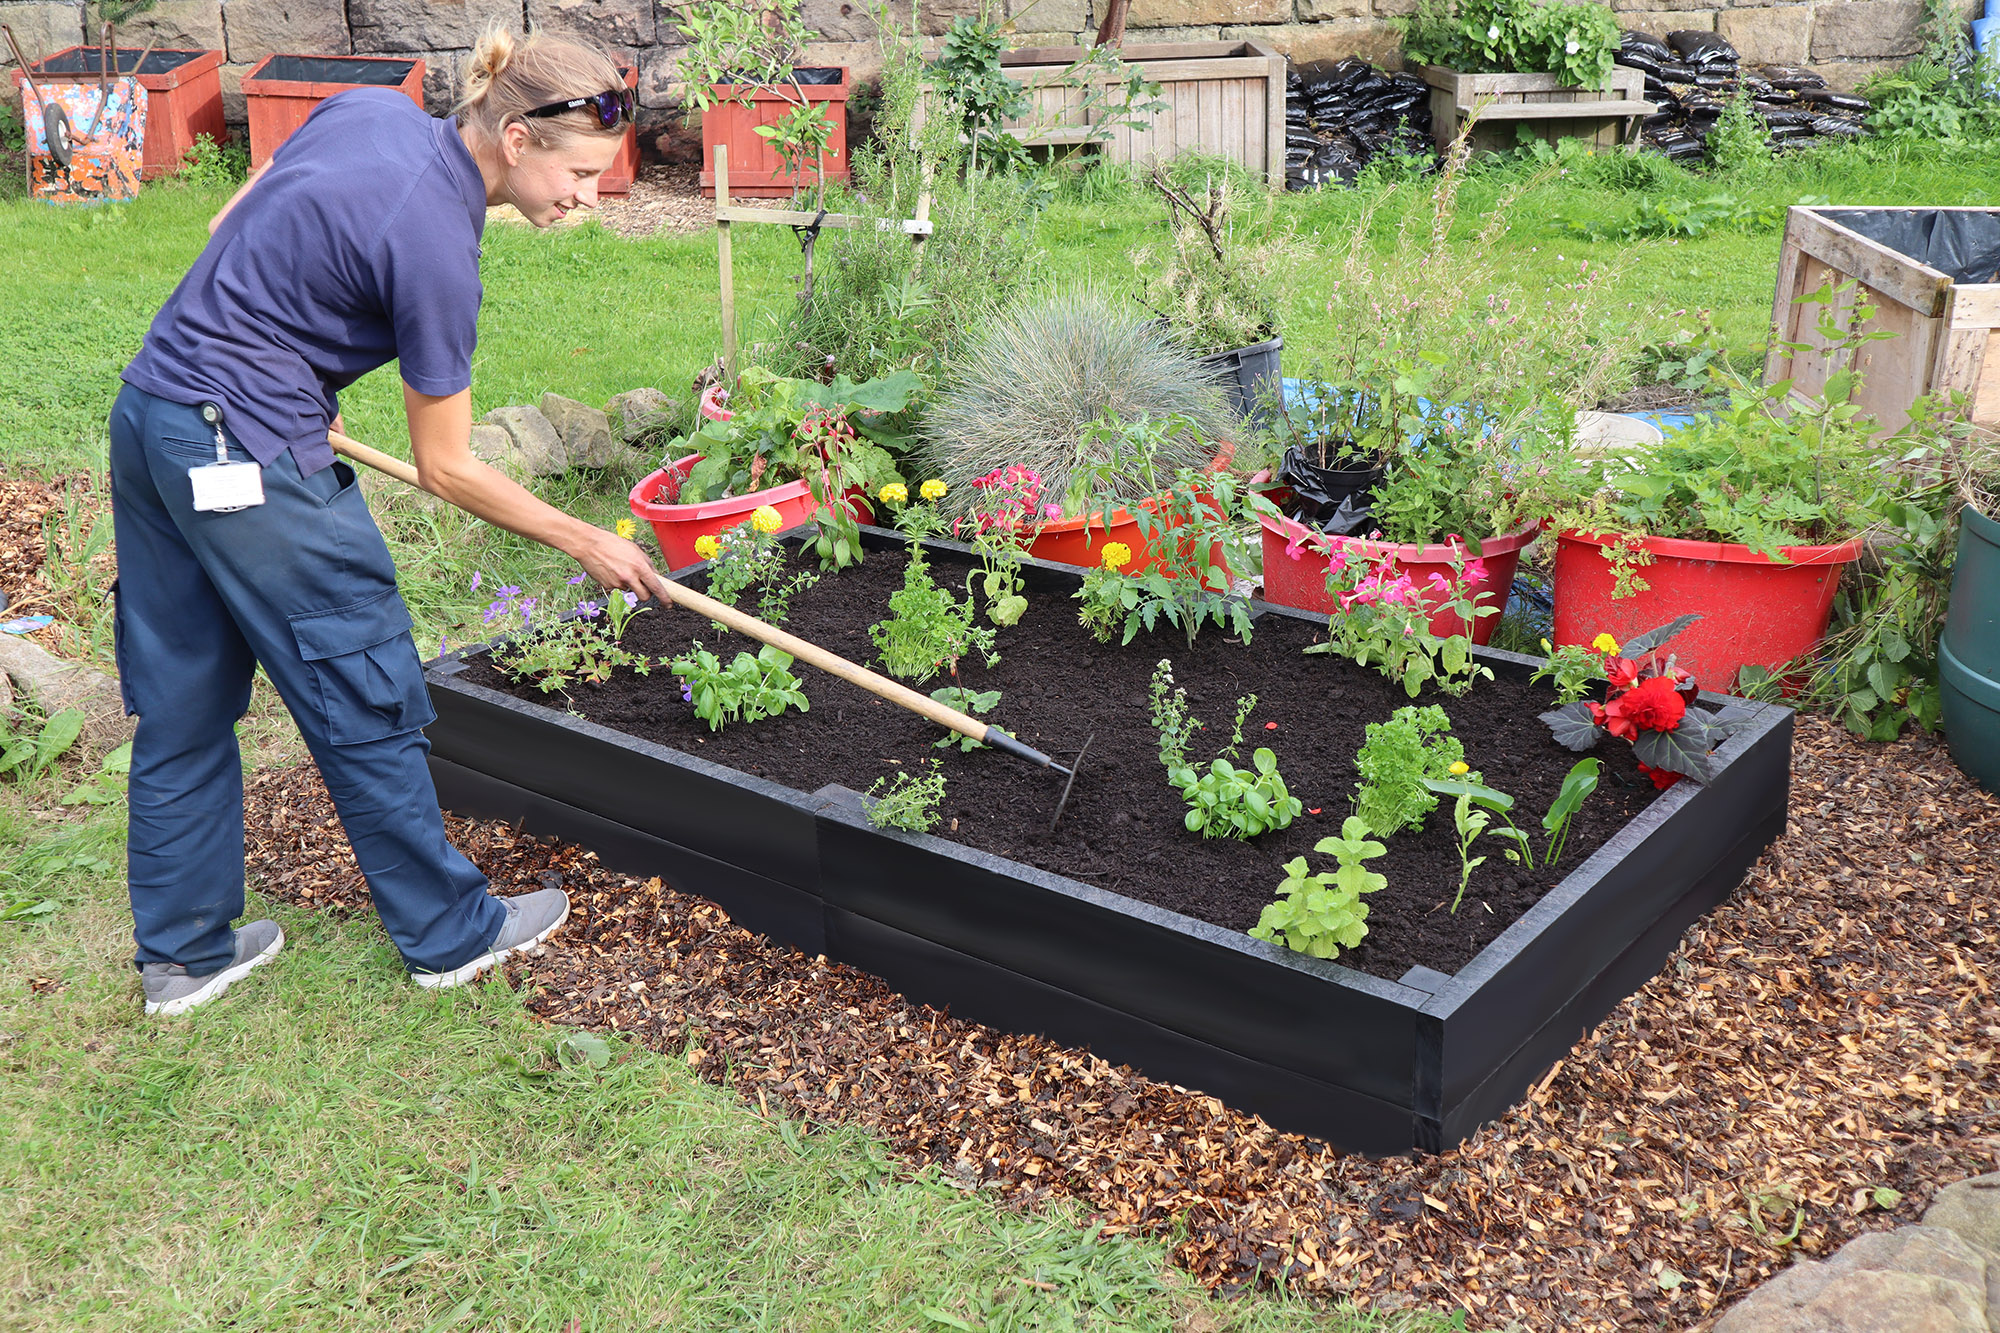 Matryna tending recycled plastic raised bed